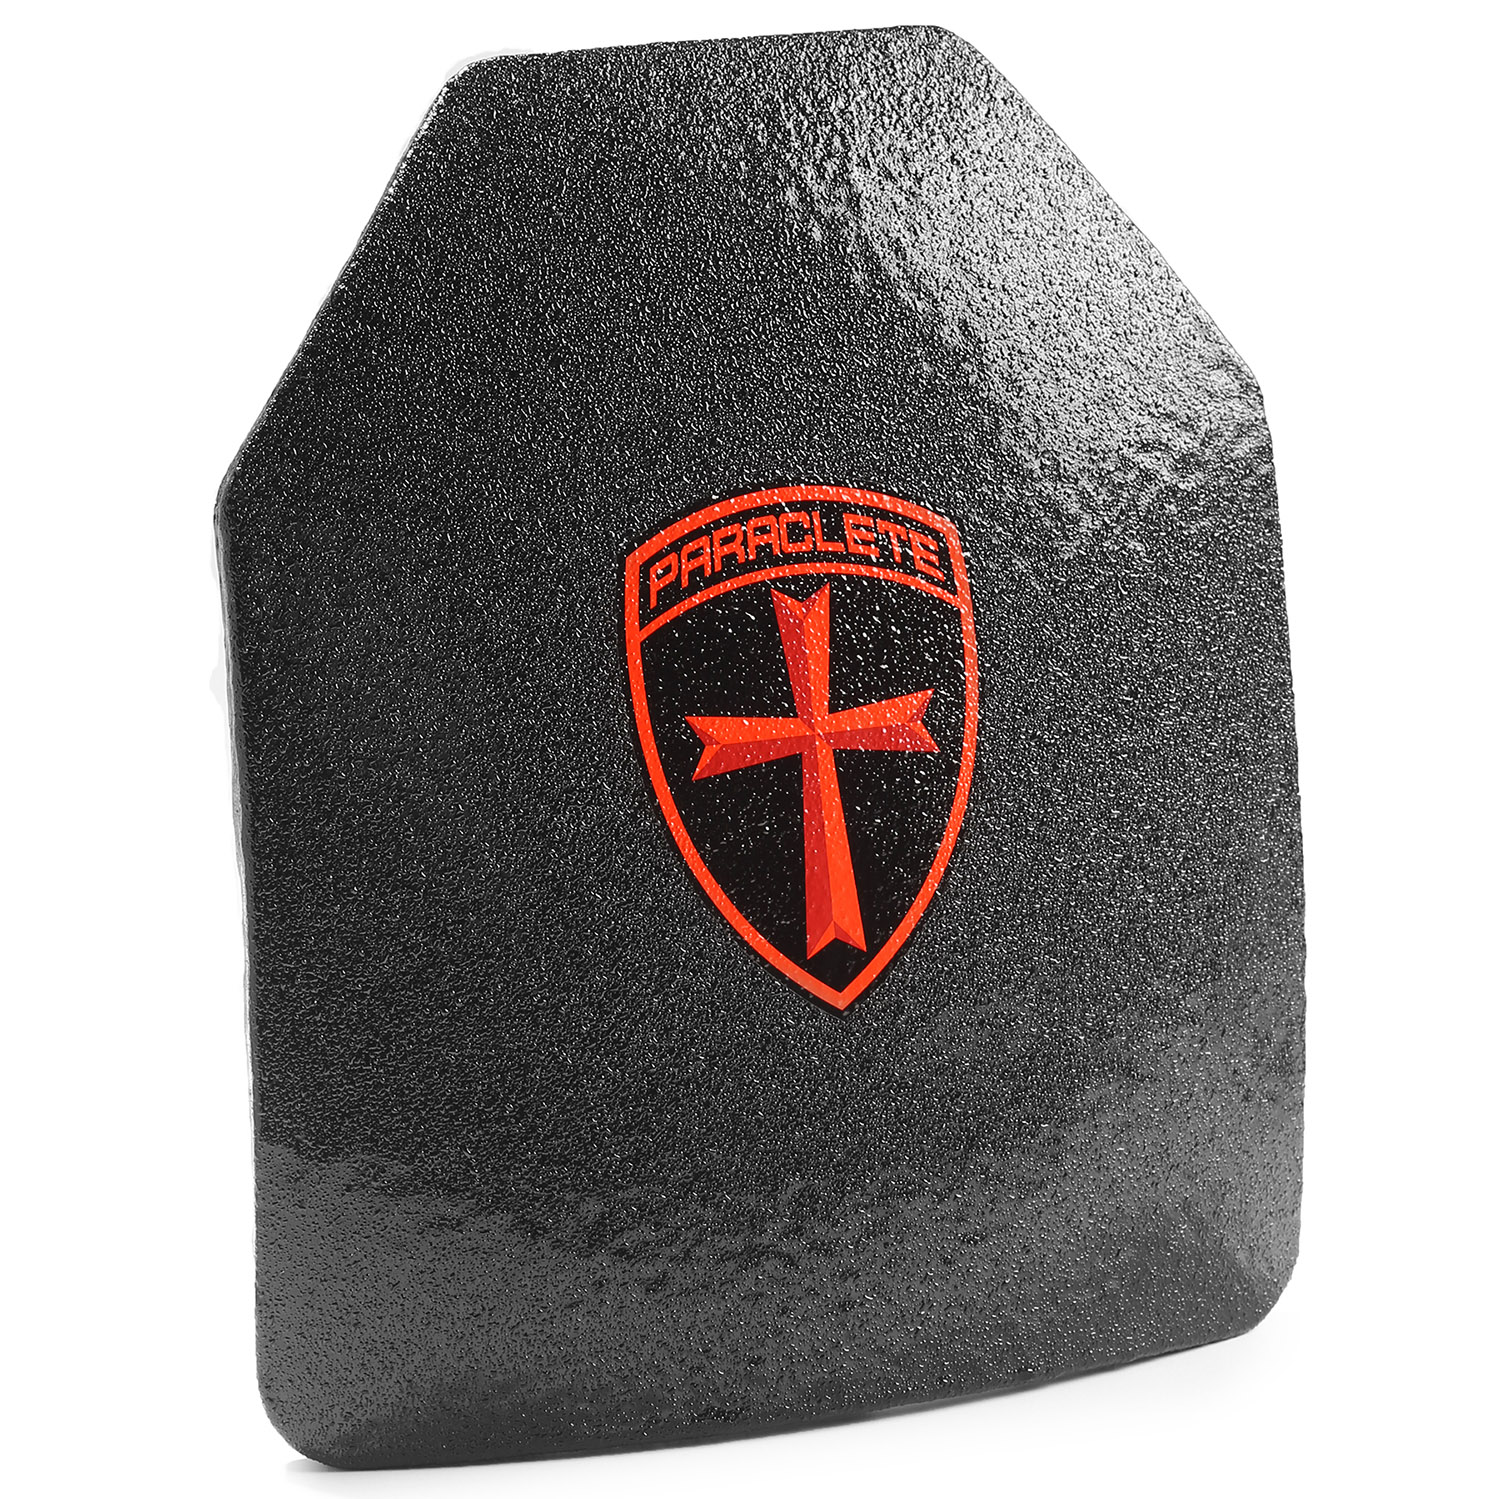 PARACLETE SPEED PLATE PLUS SHOOTERS CUT